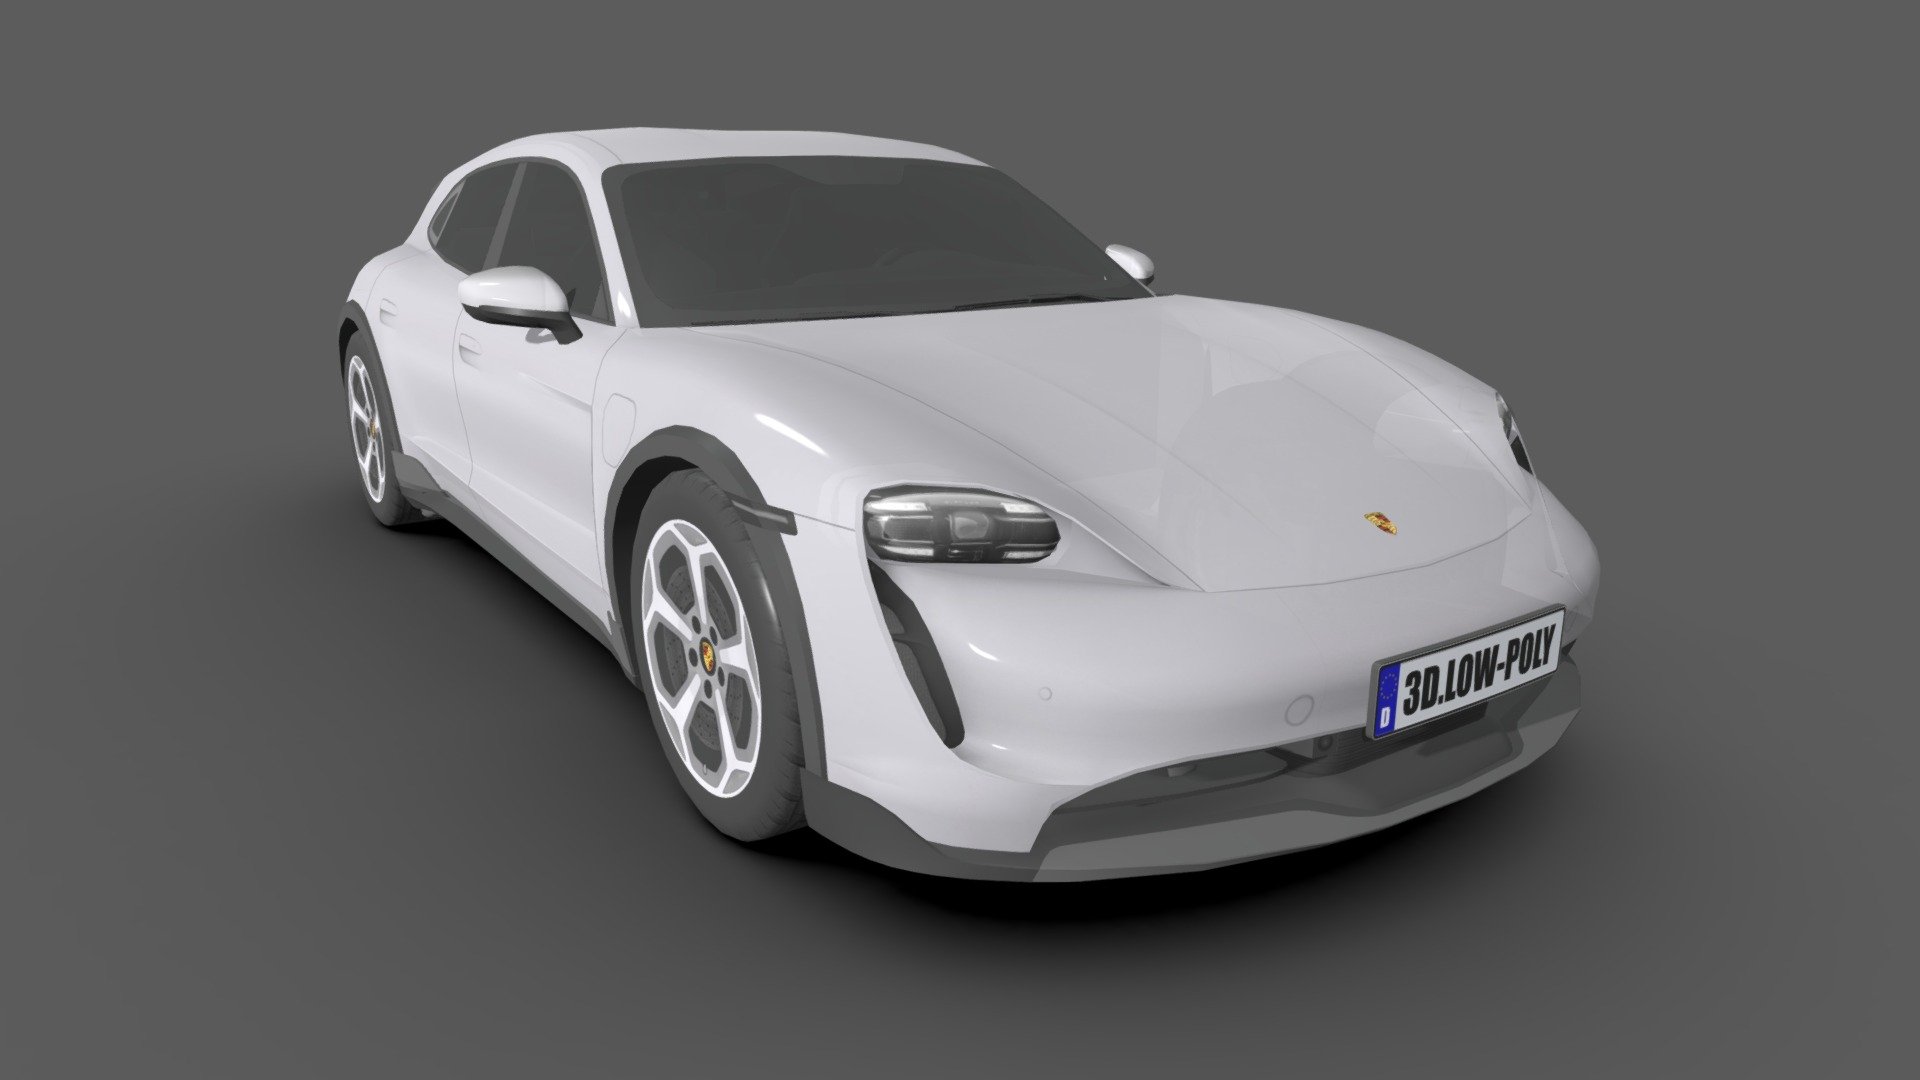 *2022 Porsche Taycan Cross Turismo

*You can use these models in any game and any project.

*The interior of these models is simply designed so that it is low poly and can be used for any game.

*This model is made with order and precision.

*Separated parts (body. Wheels).

*low poly

*Average poly count: 16,000 tris.

Texture size: 4096 * 4096(BMP)_2048 * 2048(bmp).

*High quality texture

*Thanks 3d model